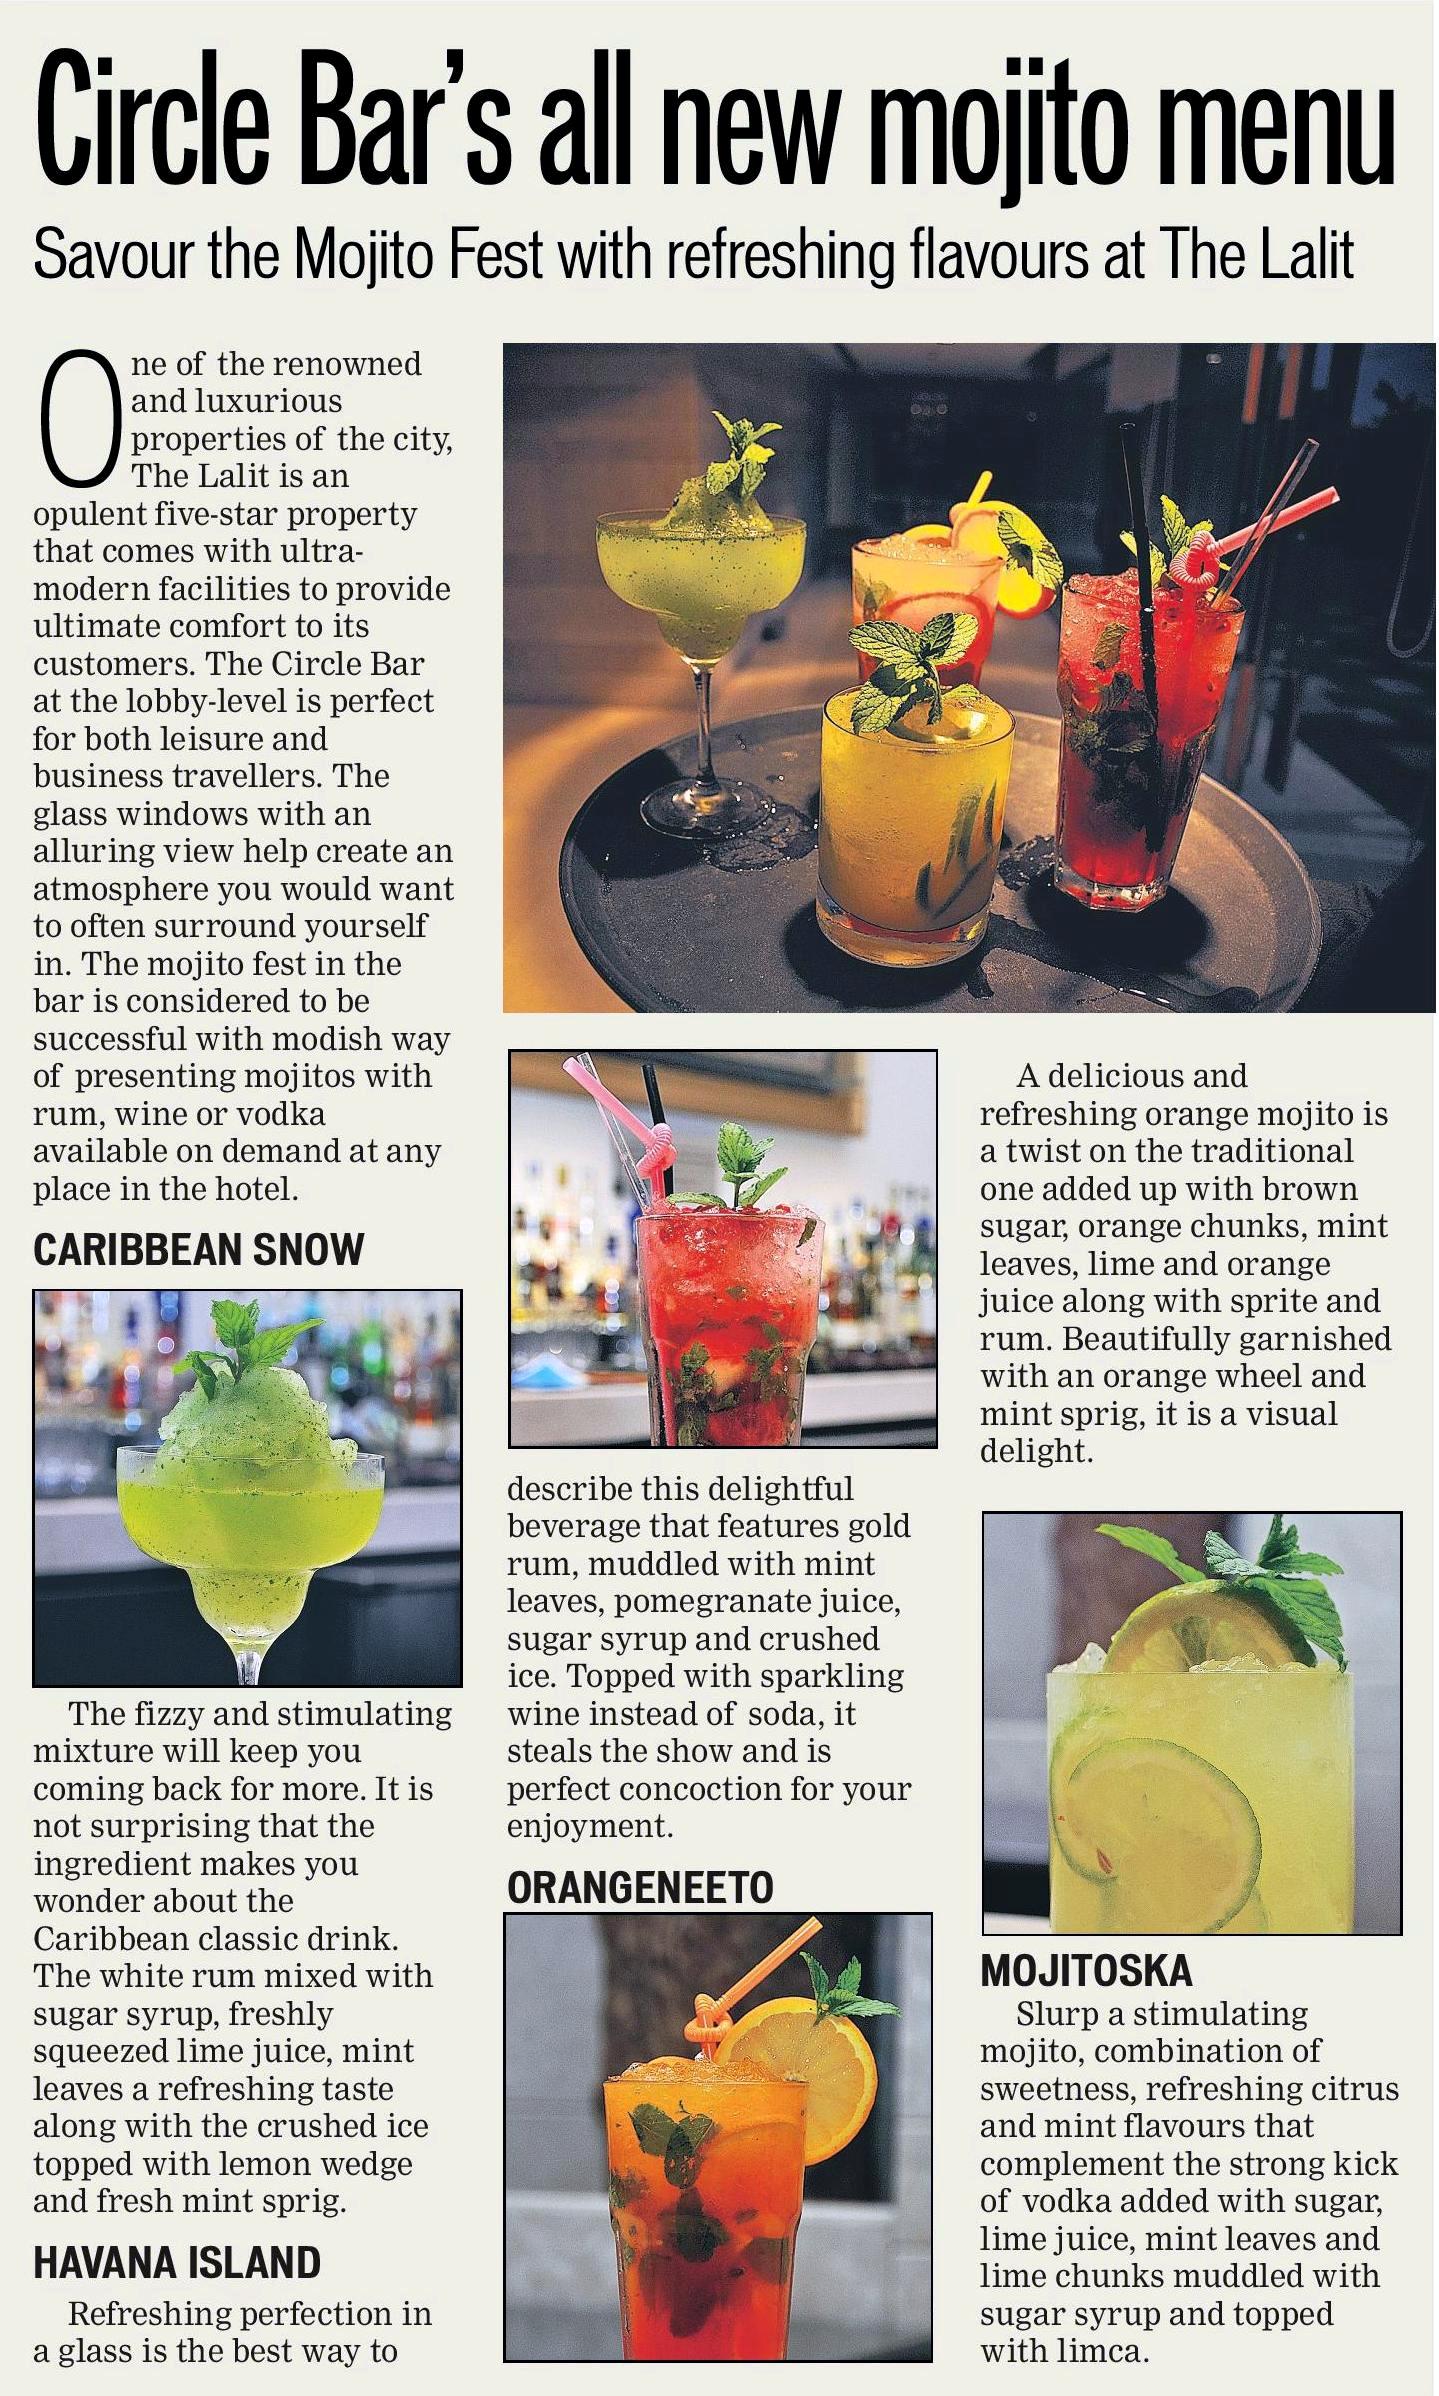 Mojito Festival at The LaLiT Chandigarh